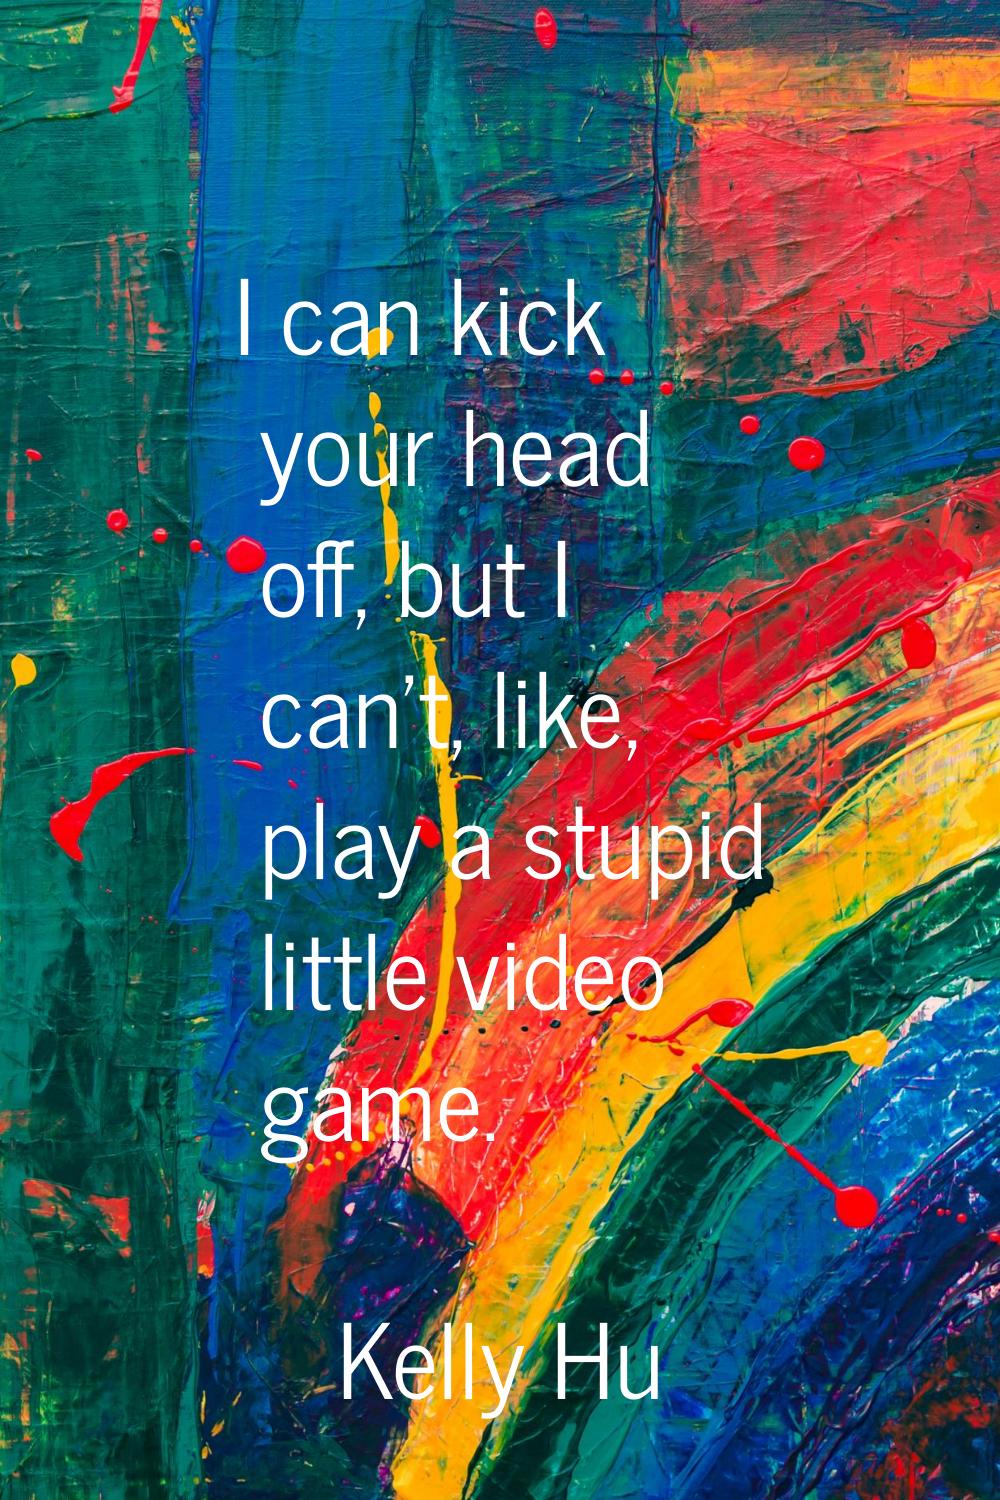 I can kick your head off, but I can't, like, play a stupid little video game.